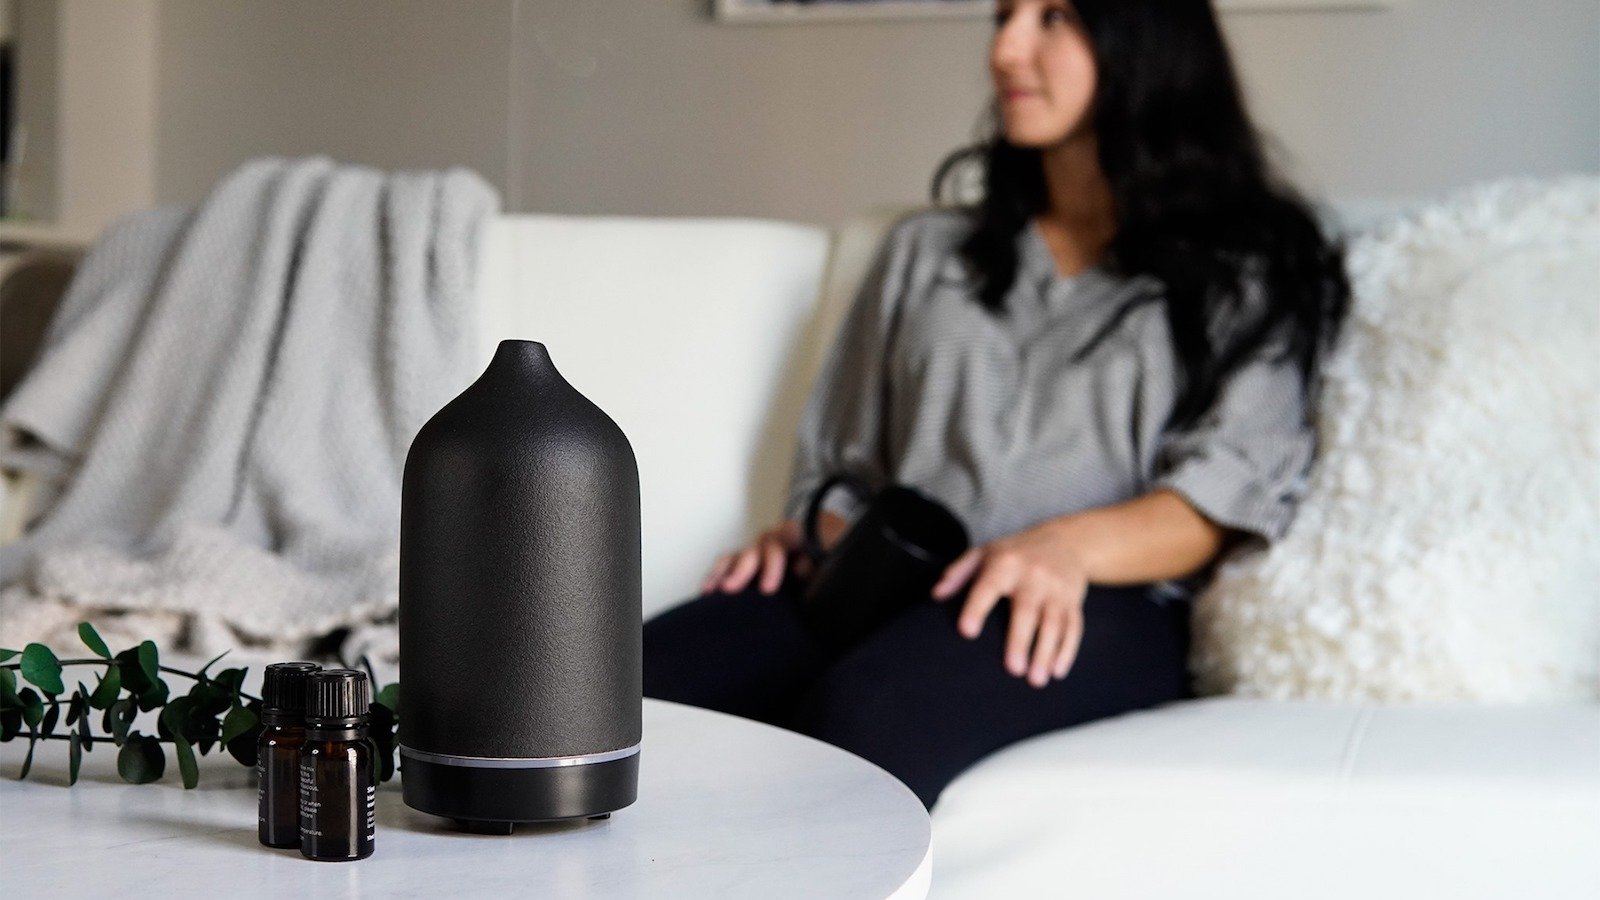 MOYA Essence Ceramic Essential Oil Diffuser is designed for peace and relaxation